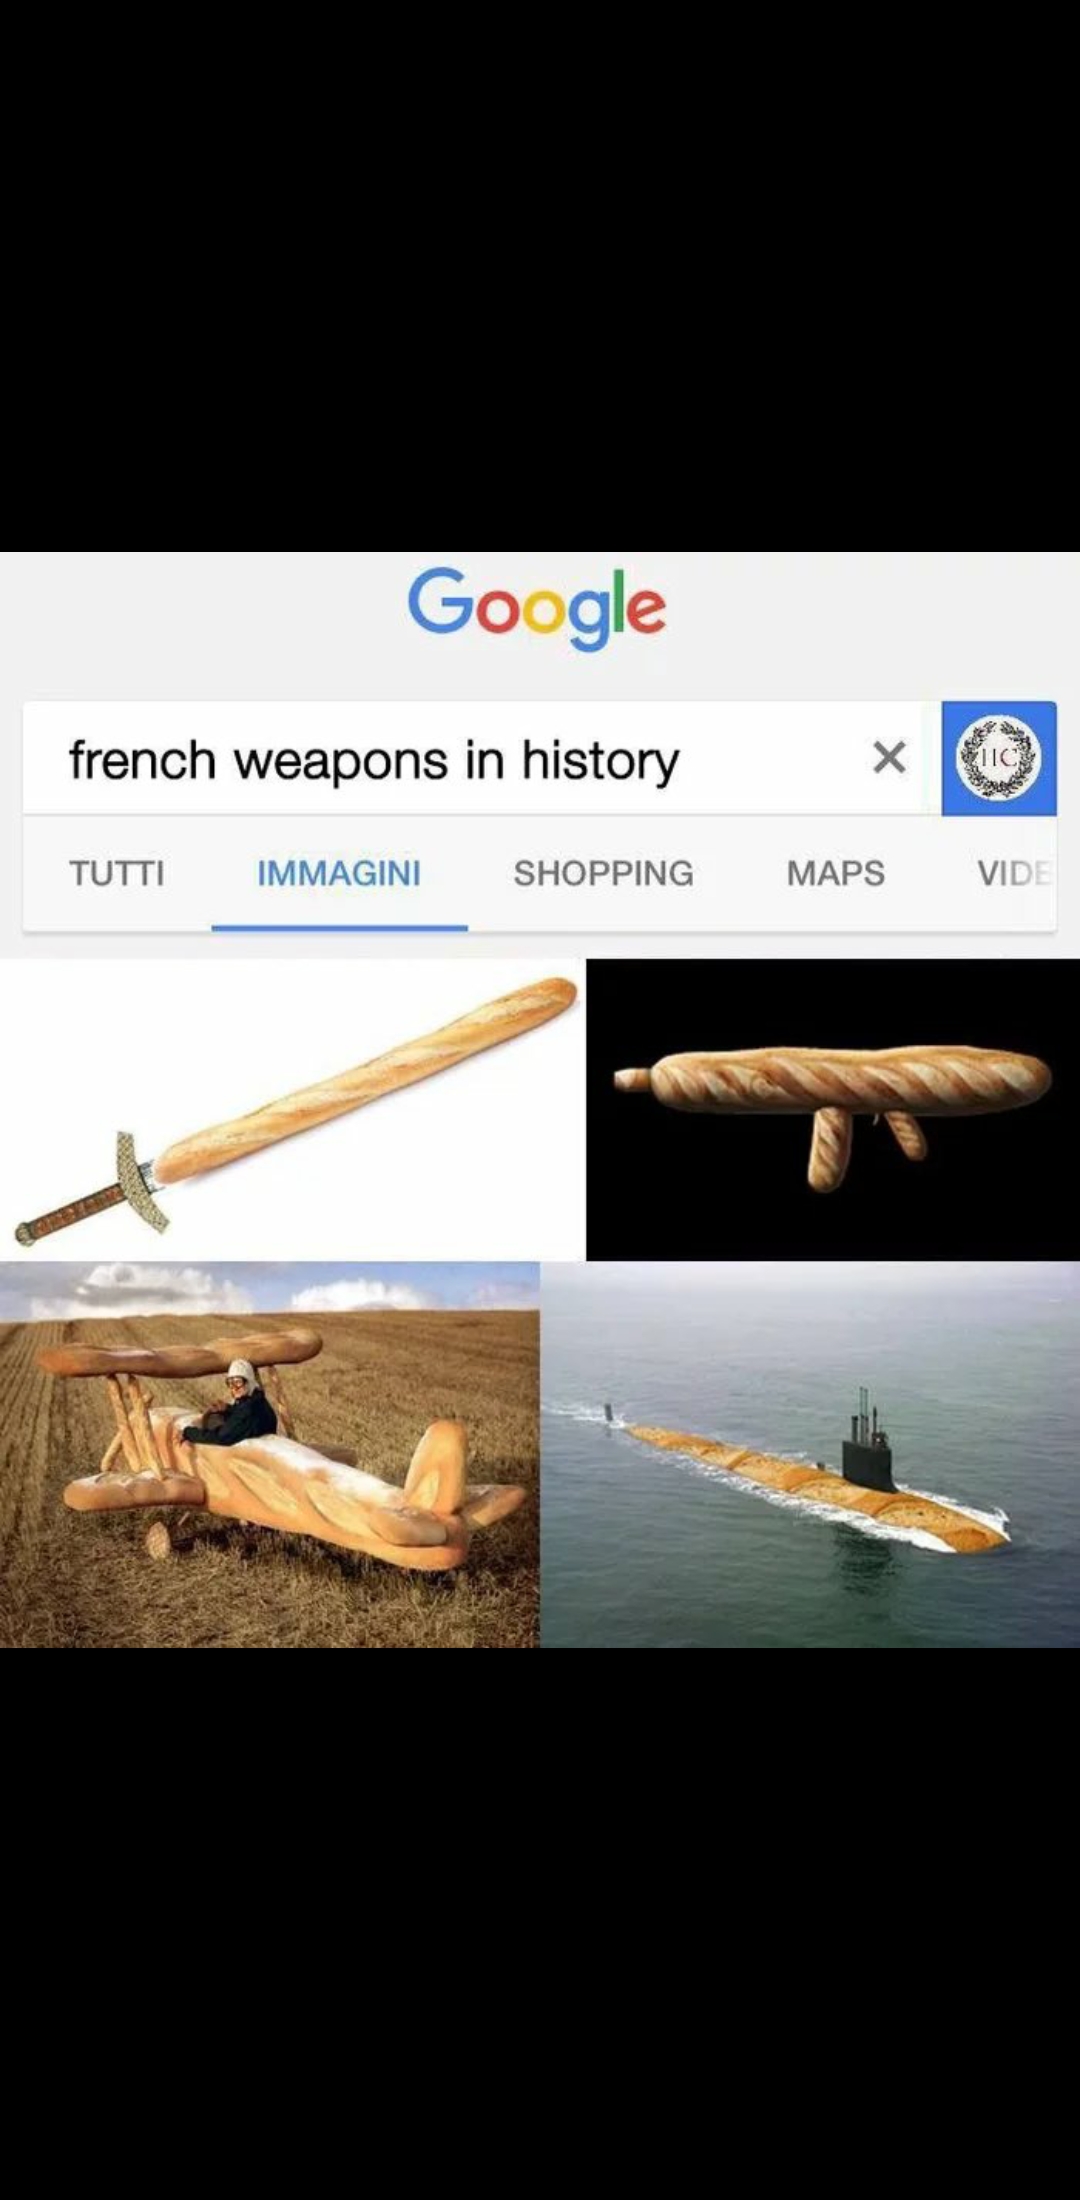 french baguette meme - Google french weapons in history Tutti Immagini Shopping Maps Vid